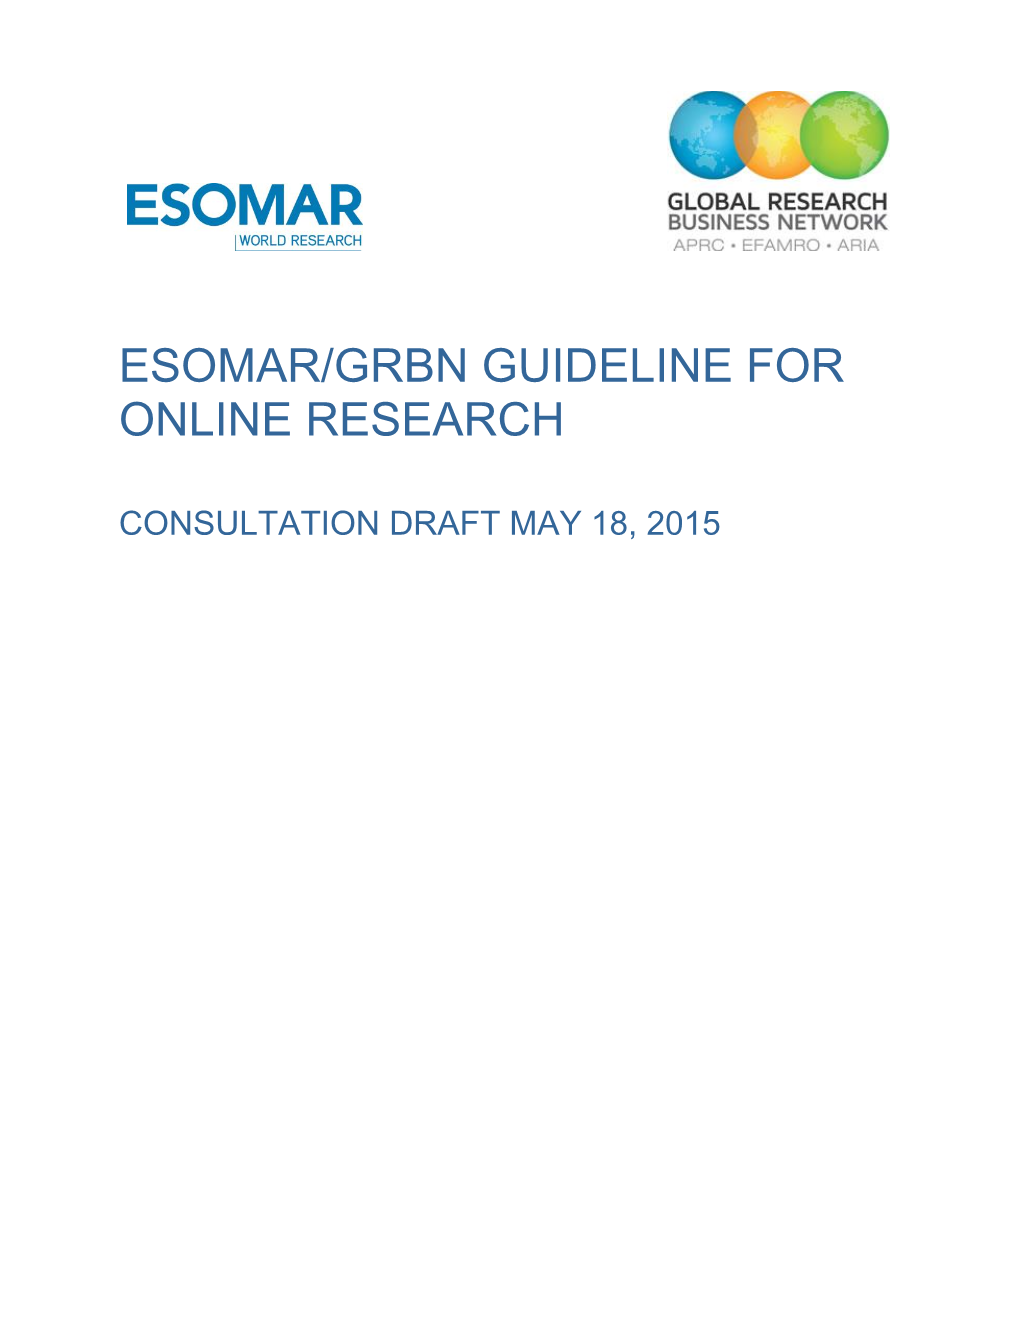 Esomar/Grbn Guideline for Online Research